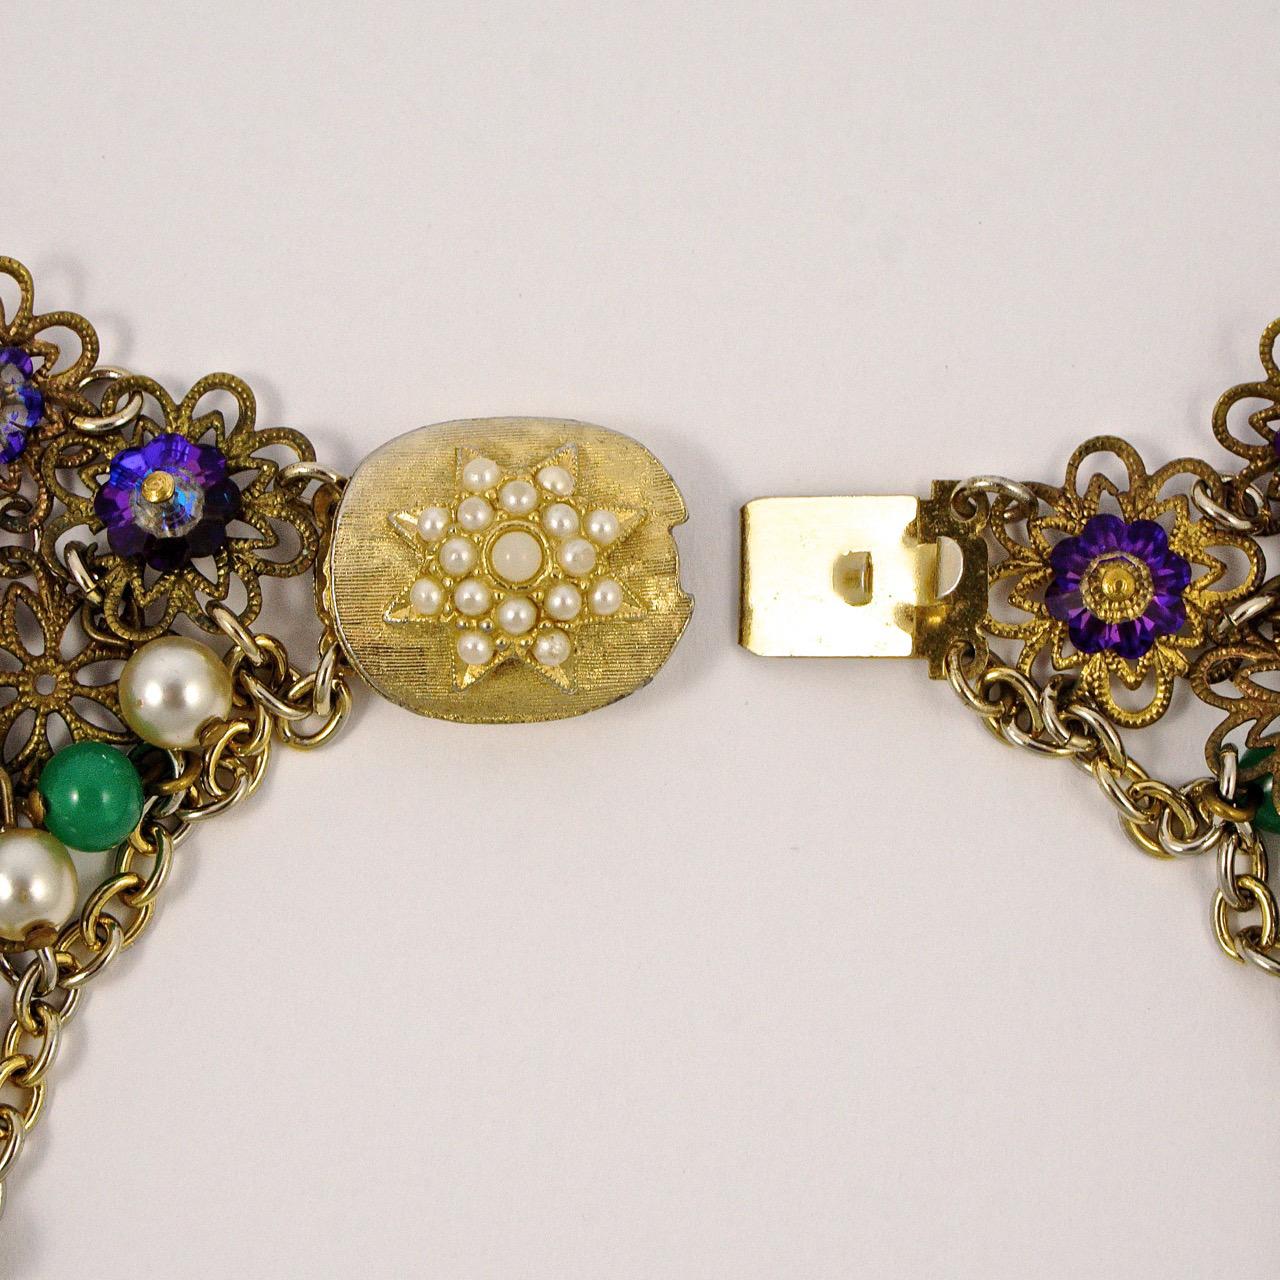 Pink Green Purple Glass Beads Faux Pearl Filigree Collar Necklace circa 1950s For Sale 2